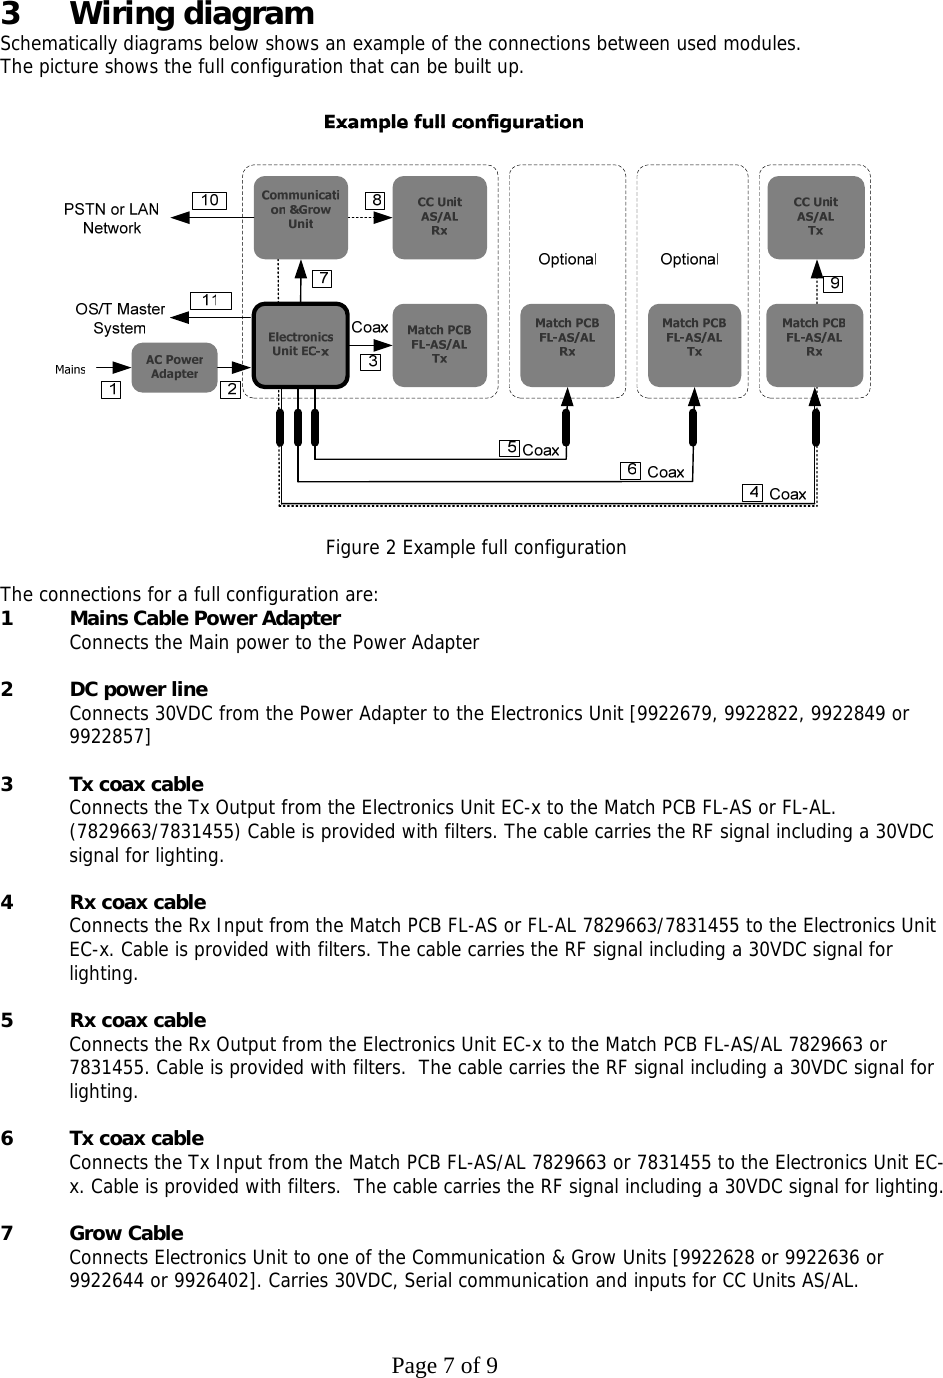     Page 7 of 9       3 Wiring diagram Schematically diagrams below shows an example of the connections between used modules. The picture shows the full configuration that can be built up.   Figure 2 Example full configuration  The connections for a full configuration are:   1  Mains Cable Power Adapter    Connects the Main power to the Power Adapter  2  DC power line  Connects 30VDC from the Power Adapter to the Electronics Unit [9922679, 9922822, 9922849 or 9922857]  3  Tx coax cable Connects the Tx Output from the Electronics Unit EC-x to the Match PCB FL-AS or FL-AL. (7829663/7831455) Cable is provided with filters. The cable carries the RF signal including a 30VDC signal for lighting.  4  Rx coax cable Connects the Rx Input from the Match PCB FL-AS or FL-AL 7829663/7831455 to the Electronics Unit EC-x. Cable is provided with filters. The cable carries the RF signal including a 30VDC signal for lighting.  5  Rx coax cable Connects the Rx Output from the Electronics Unit EC-x to the Match PCB FL-AS/AL 7829663 or 7831455. Cable is provided with filters.  The cable carries the RF signal including a 30VDC signal for lighting.  6  Tx coax cable  Connects the Tx Input from the Match PCB FL-AS/AL 7829663 or 7831455 to the Electronics Unit EC-x. Cable is provided with filters.  The cable carries the RF signal including a 30VDC signal for lighting.  7  Grow Cable  Connects Electronics Unit to one of the Communication &amp; Grow Units [9922628 or 9922636 or 9922644 or 9926402]. Carries 30VDC, Serial communication and inputs for CC Units AS/AL. 